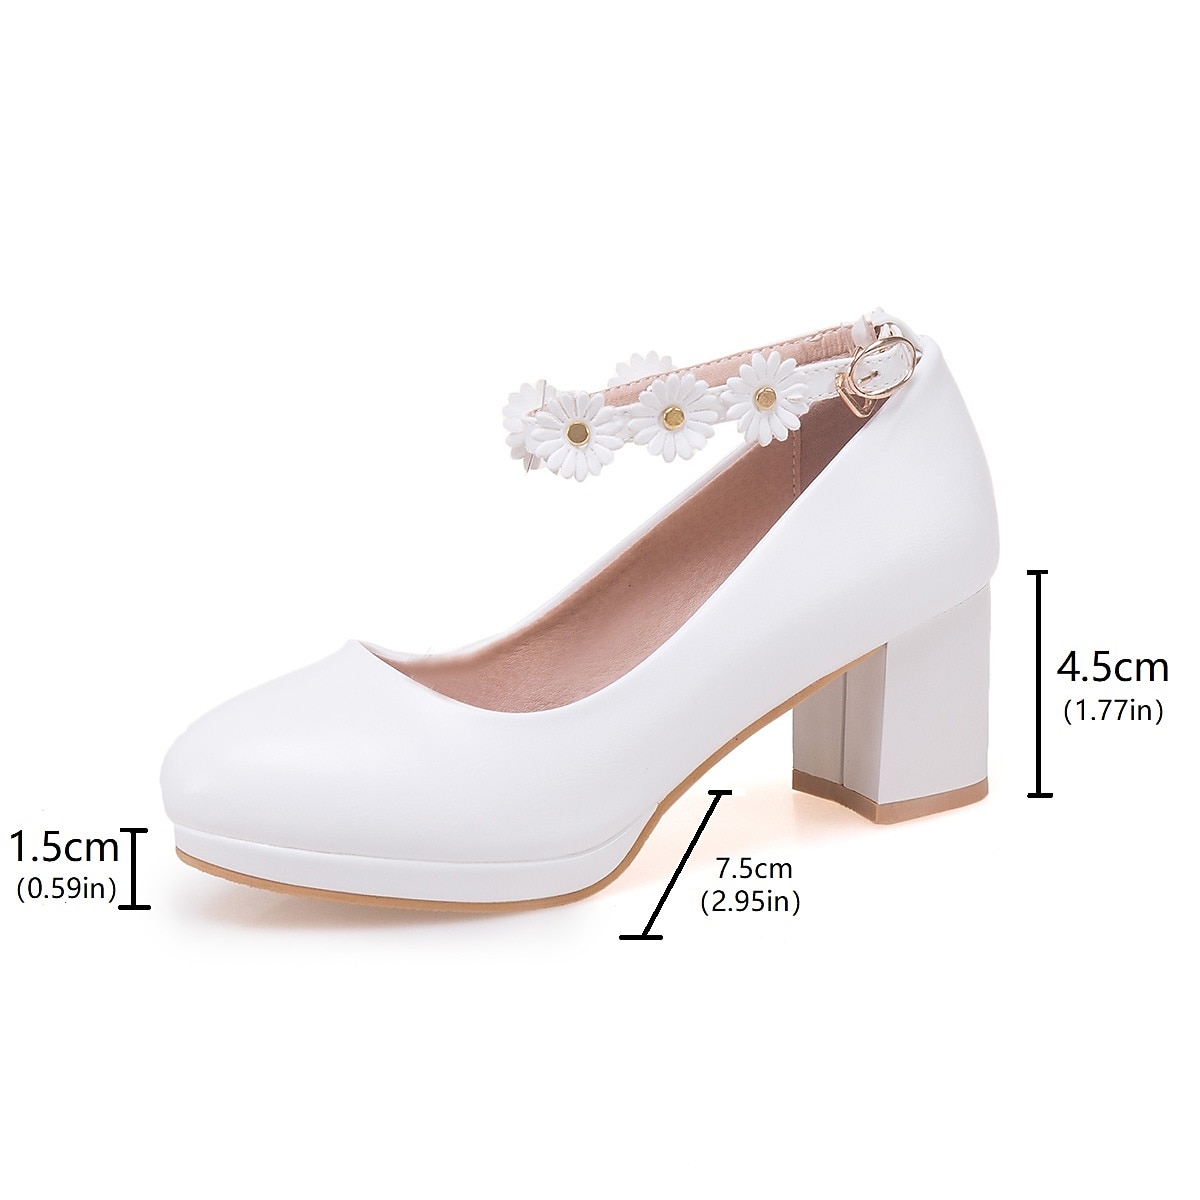 Amazon.com | Big Girls High Heel Catwalk Model Shoes 𝐏umps High School  Prom Solid Ball Party Gown Sandals for (White, 3.5 Big Kids) | Sandals